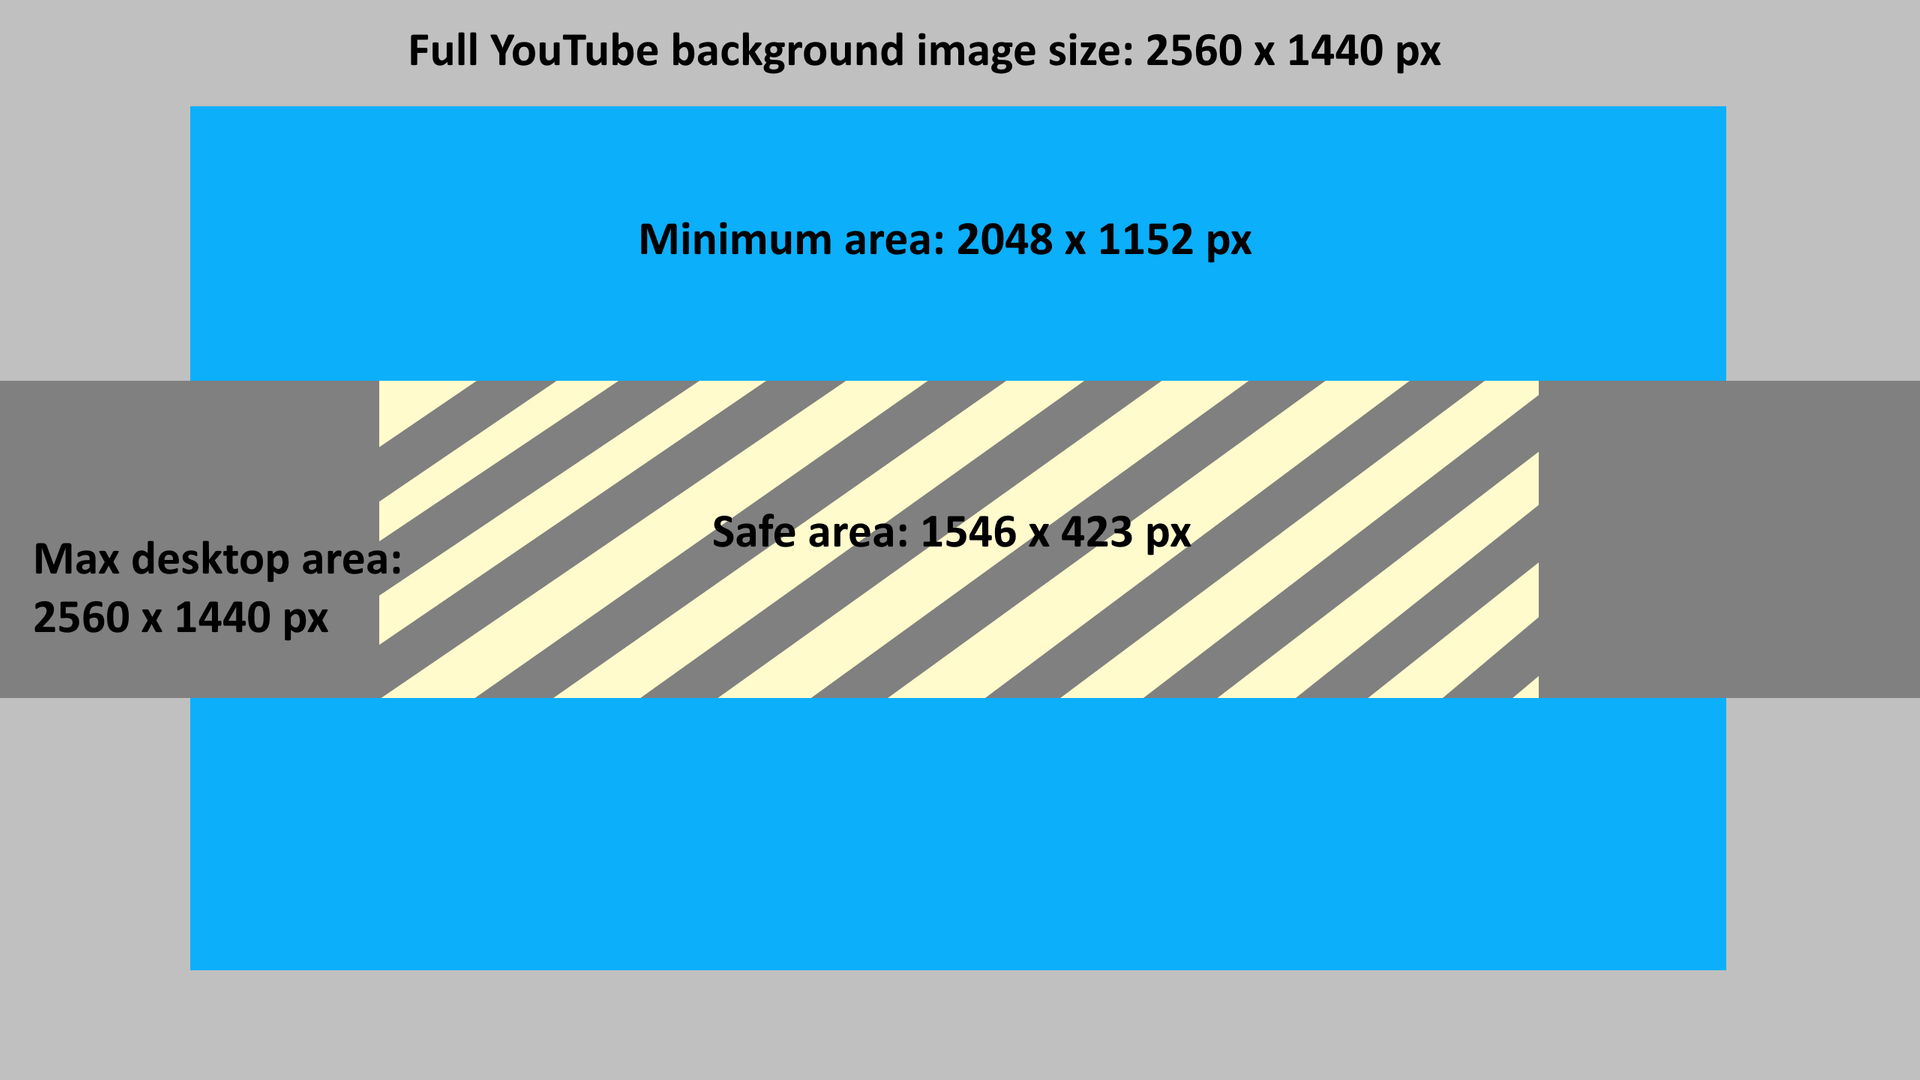 The Best Youtube Banner Size In 2020 + Best Practices For Within Youtube Banner Template Size